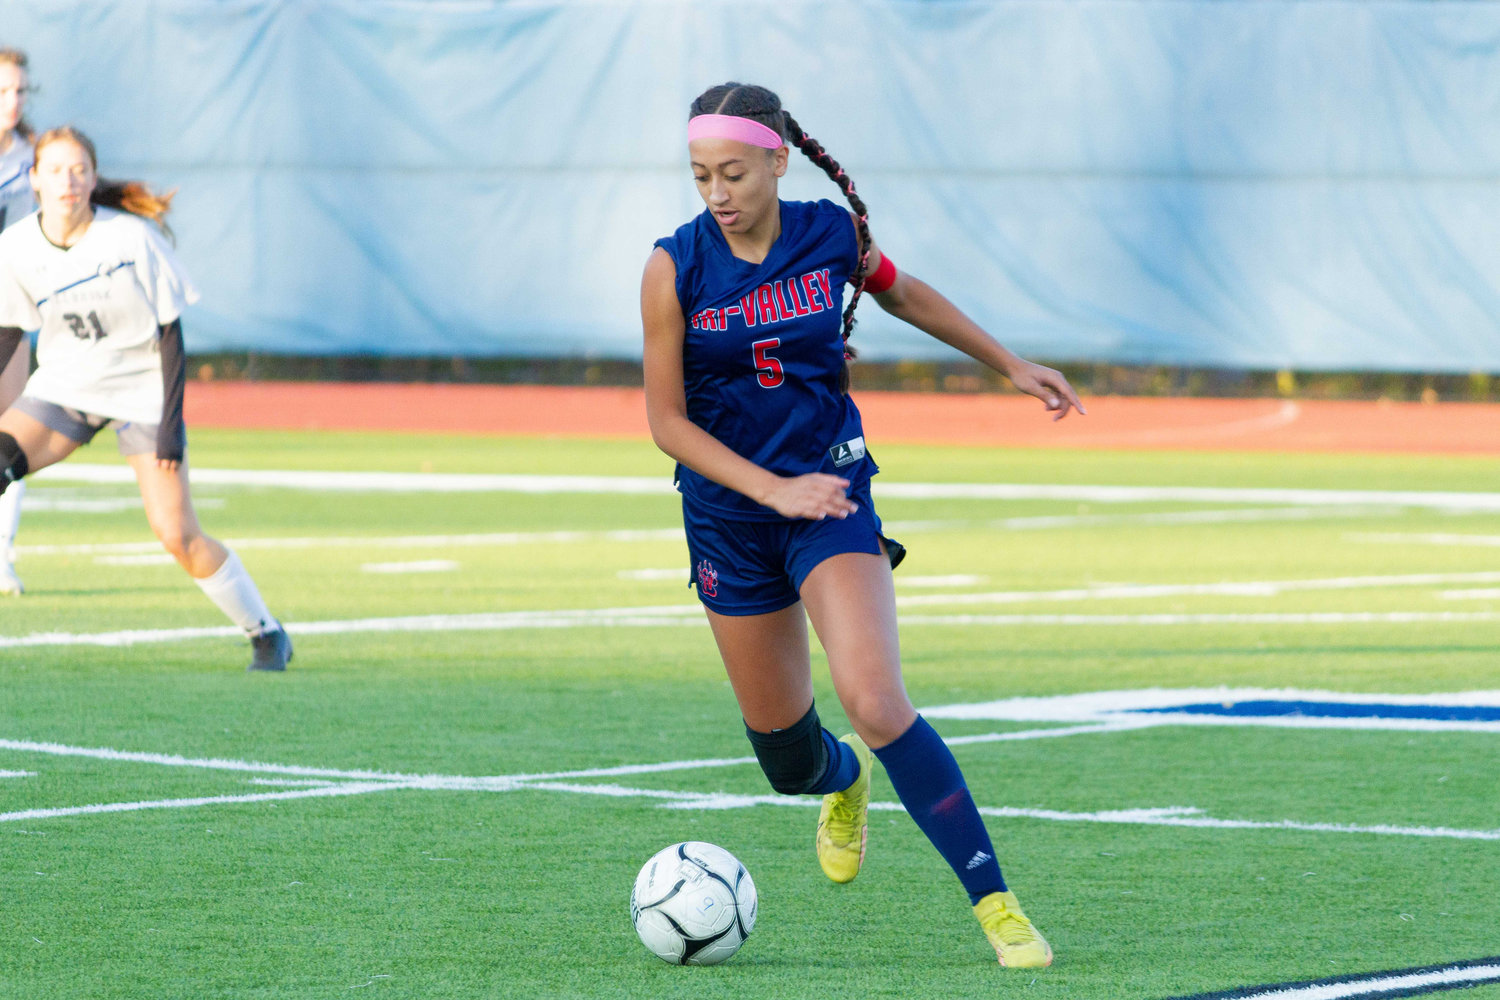 Lady Bears premier striker, Kendall McGregor, scored the only goal in the team’s defeat against No. 2 seed Millbrook’s Blazers during the Section IX Class C girl’s soccer championship played at the Middletown High School.